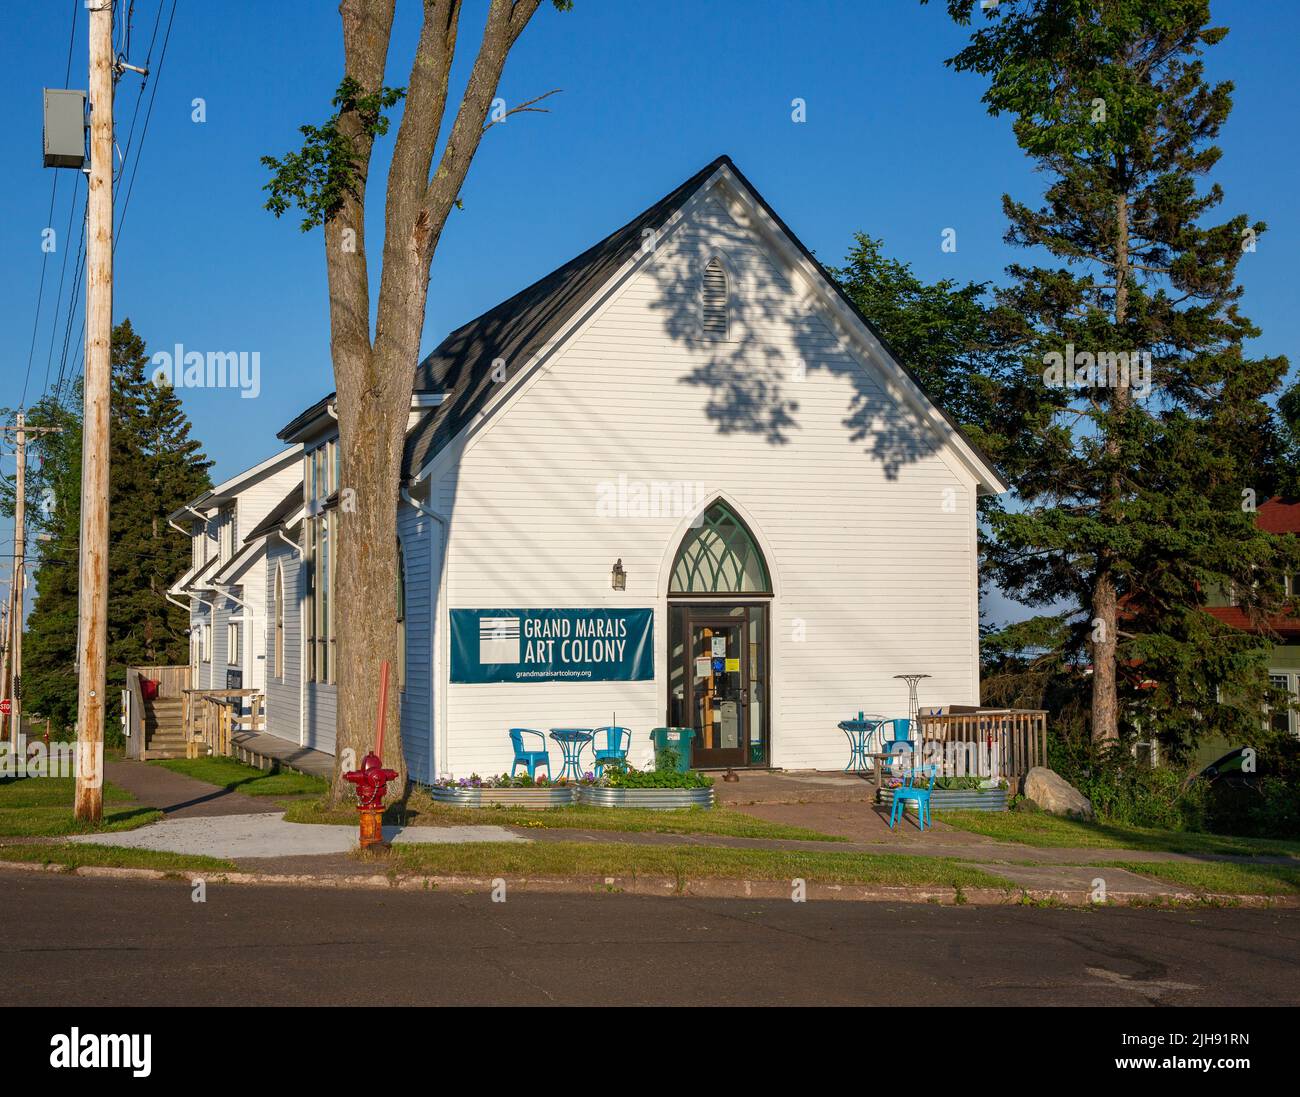 Opened in 1947, the Grand Marais Art Colony was founded by Barney Quick and is the longest-lived art colony in Minnesota. In 1963 Birney Quick and Byr Stock Photo